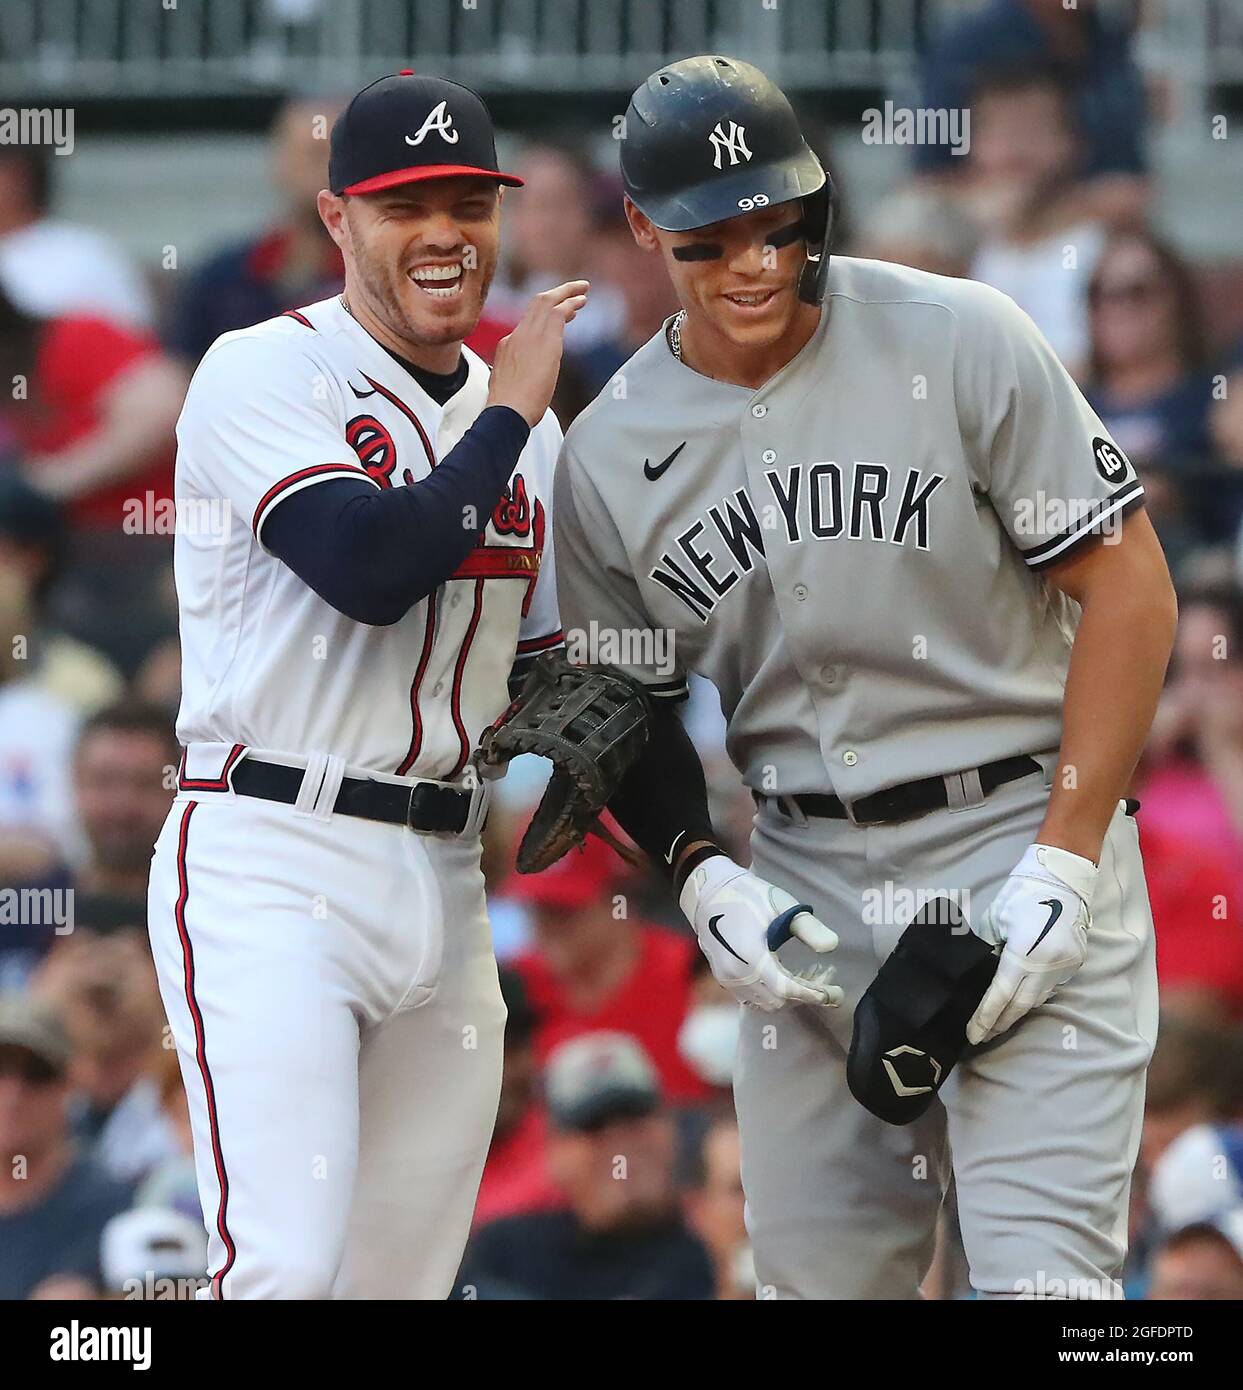 Atlanta Braves first baseman Freddie Freeman and New York Yankees  outfielder Aaron Judge share a laugh at first base with Freeman giving him  a pat on the shoulder after Judge hit a